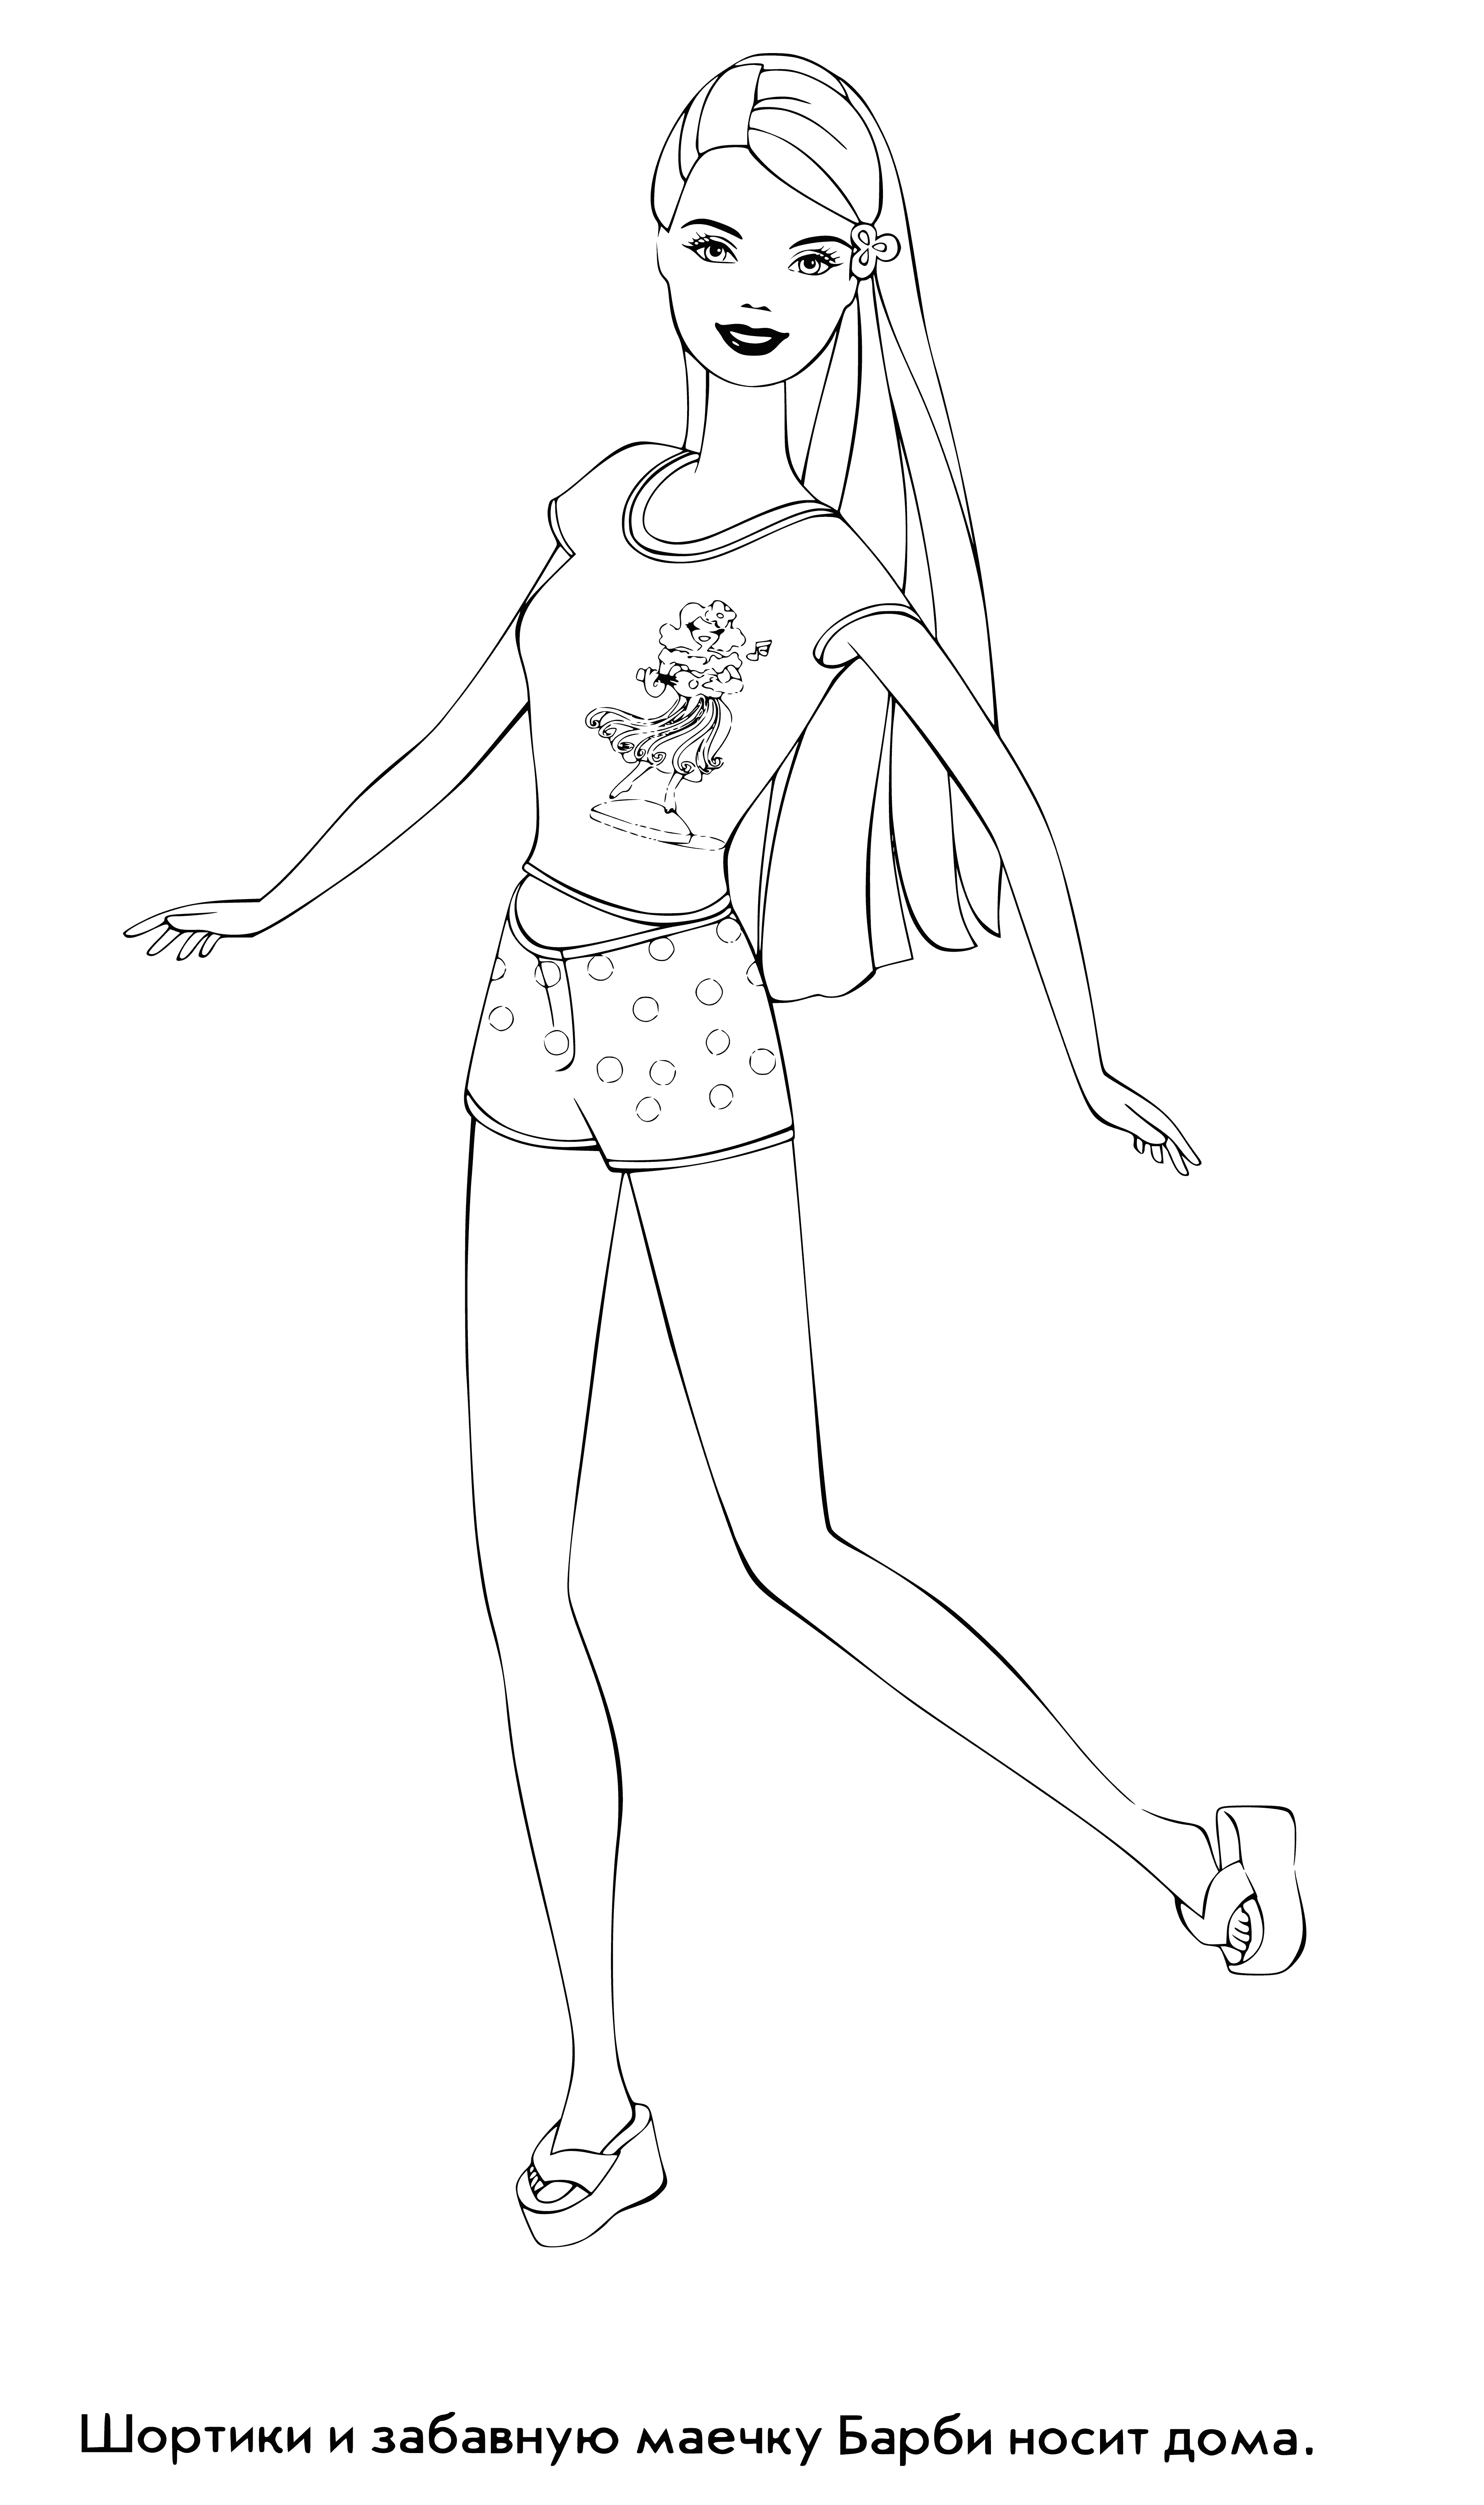 coloring page: Barbie is a popular fashion doll manufactured by Mattel, Inc. aspired by a German doll called Bild Lilli, and has been subject to lawsuits, criticism and parodies over the years.